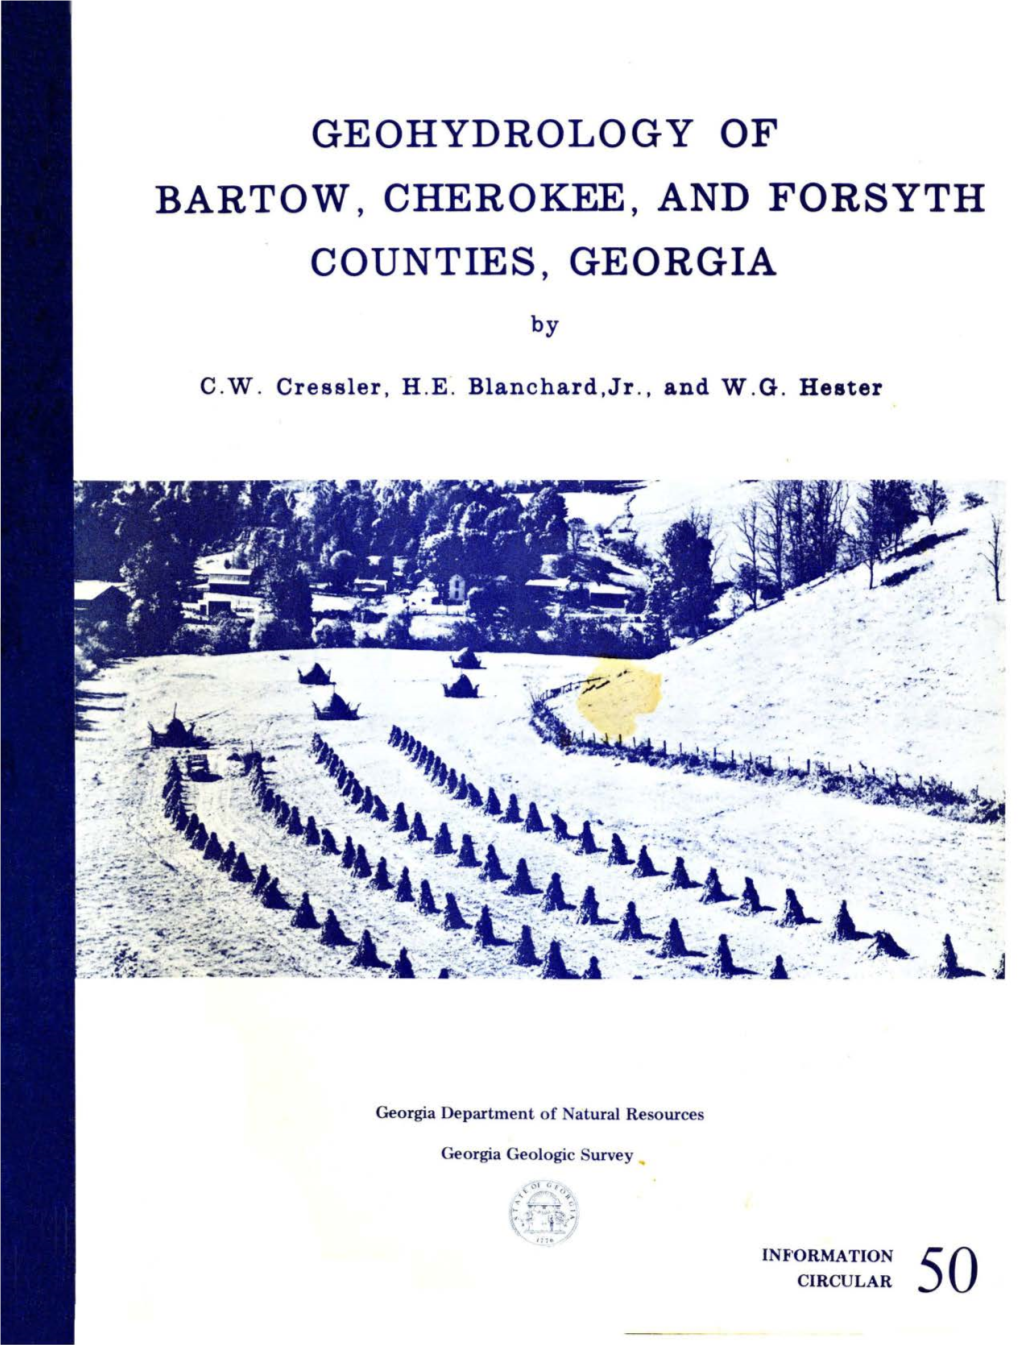 IC-50 Geohydrology of Bartow, Cherokee, and Forsyth Counties